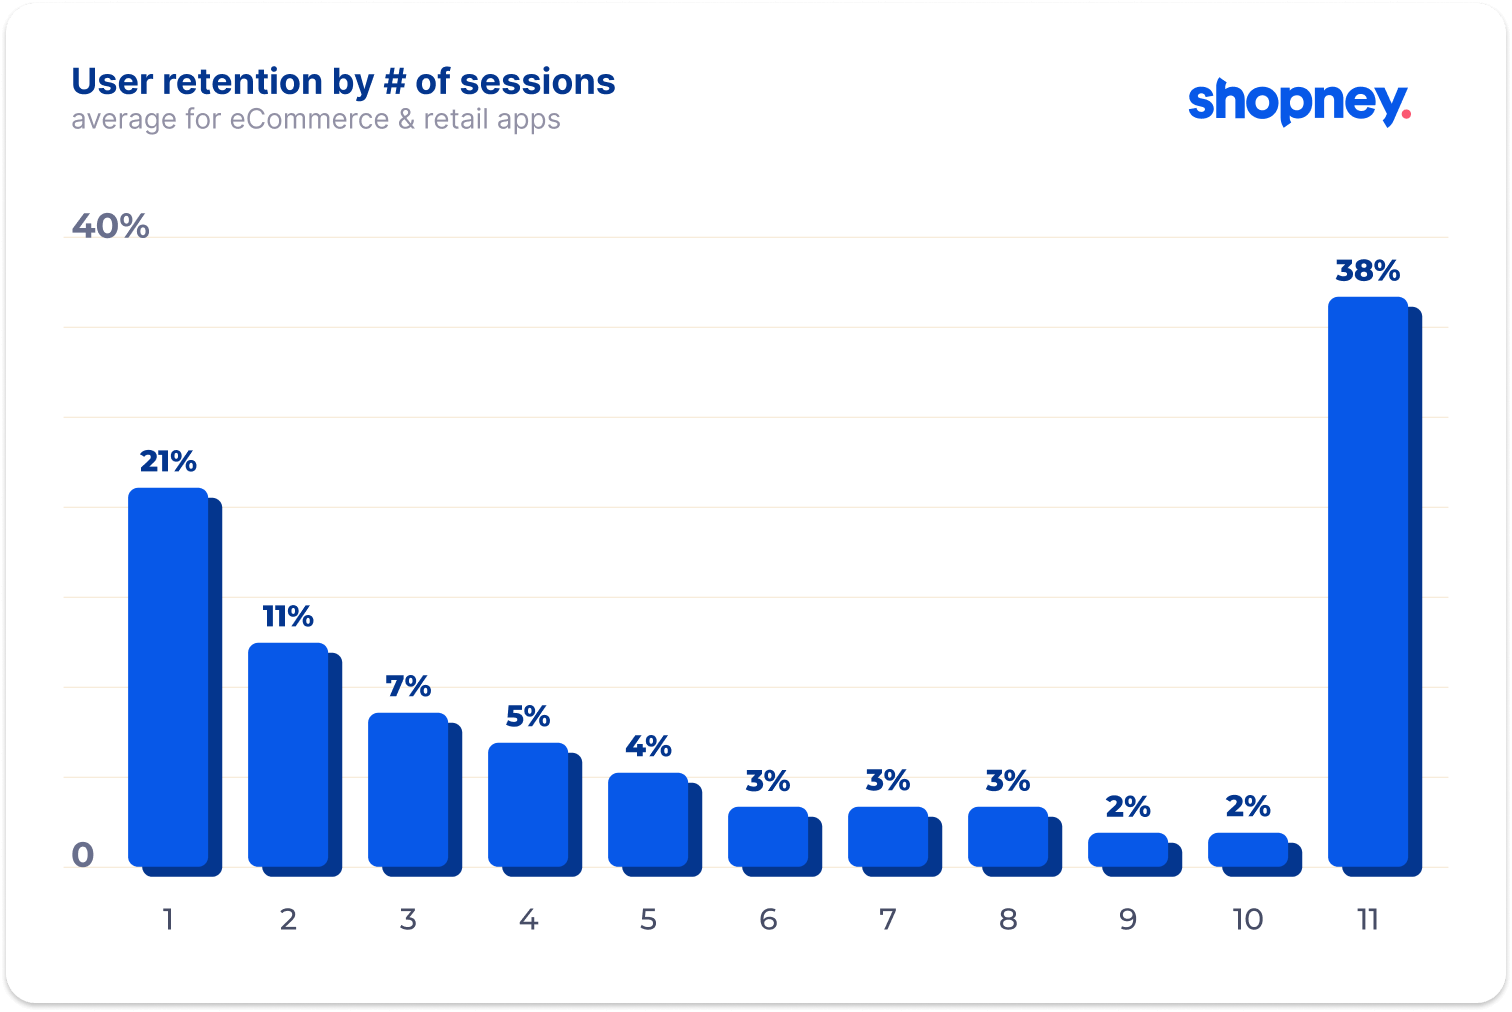 user retention by number of sessions for eCommerce and retail apps